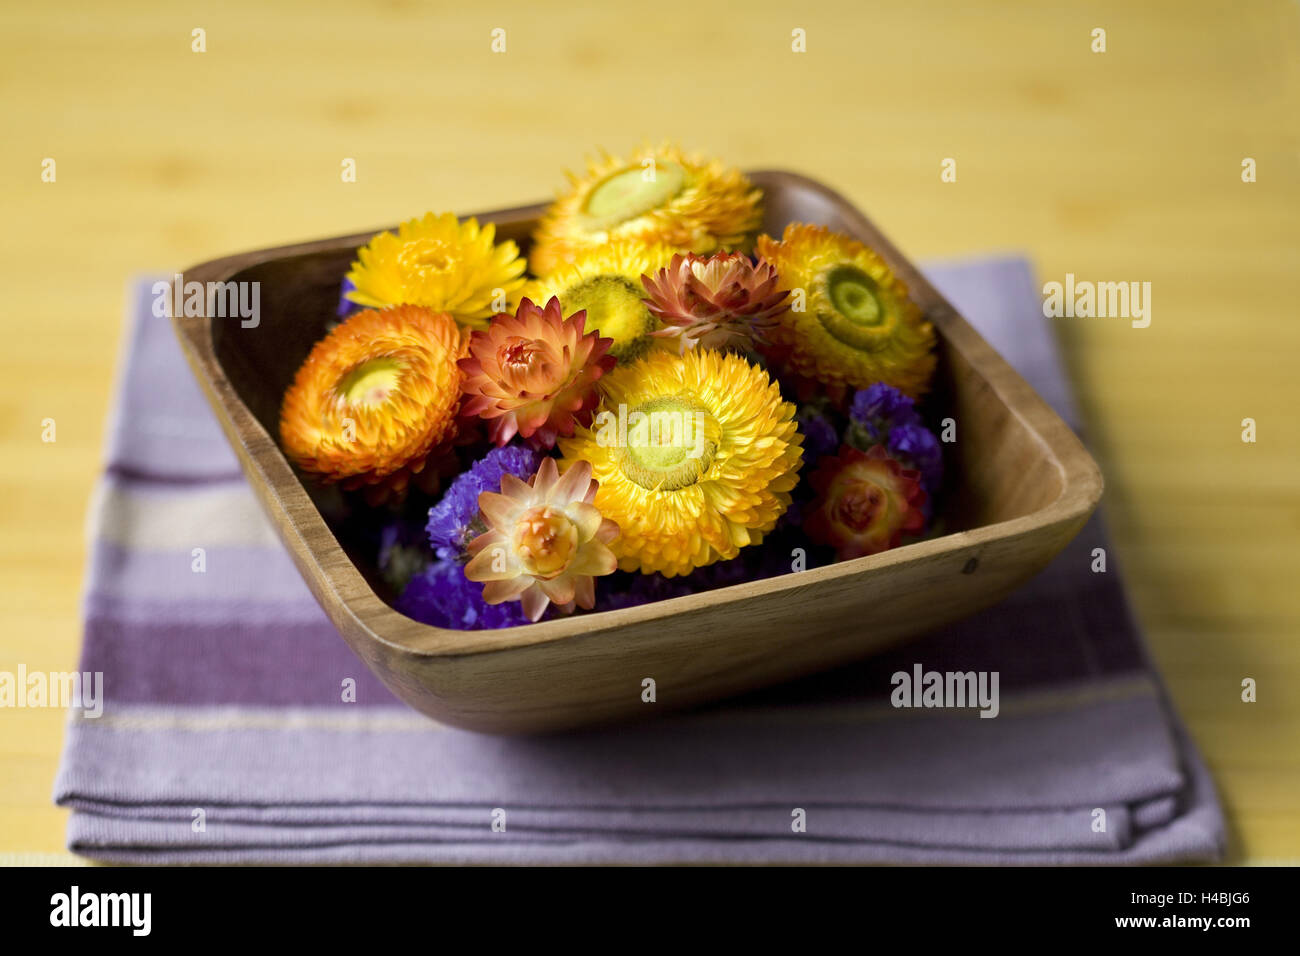 Yellow and red straw flowers in wooden peel, mauve napkin, Stock Photo